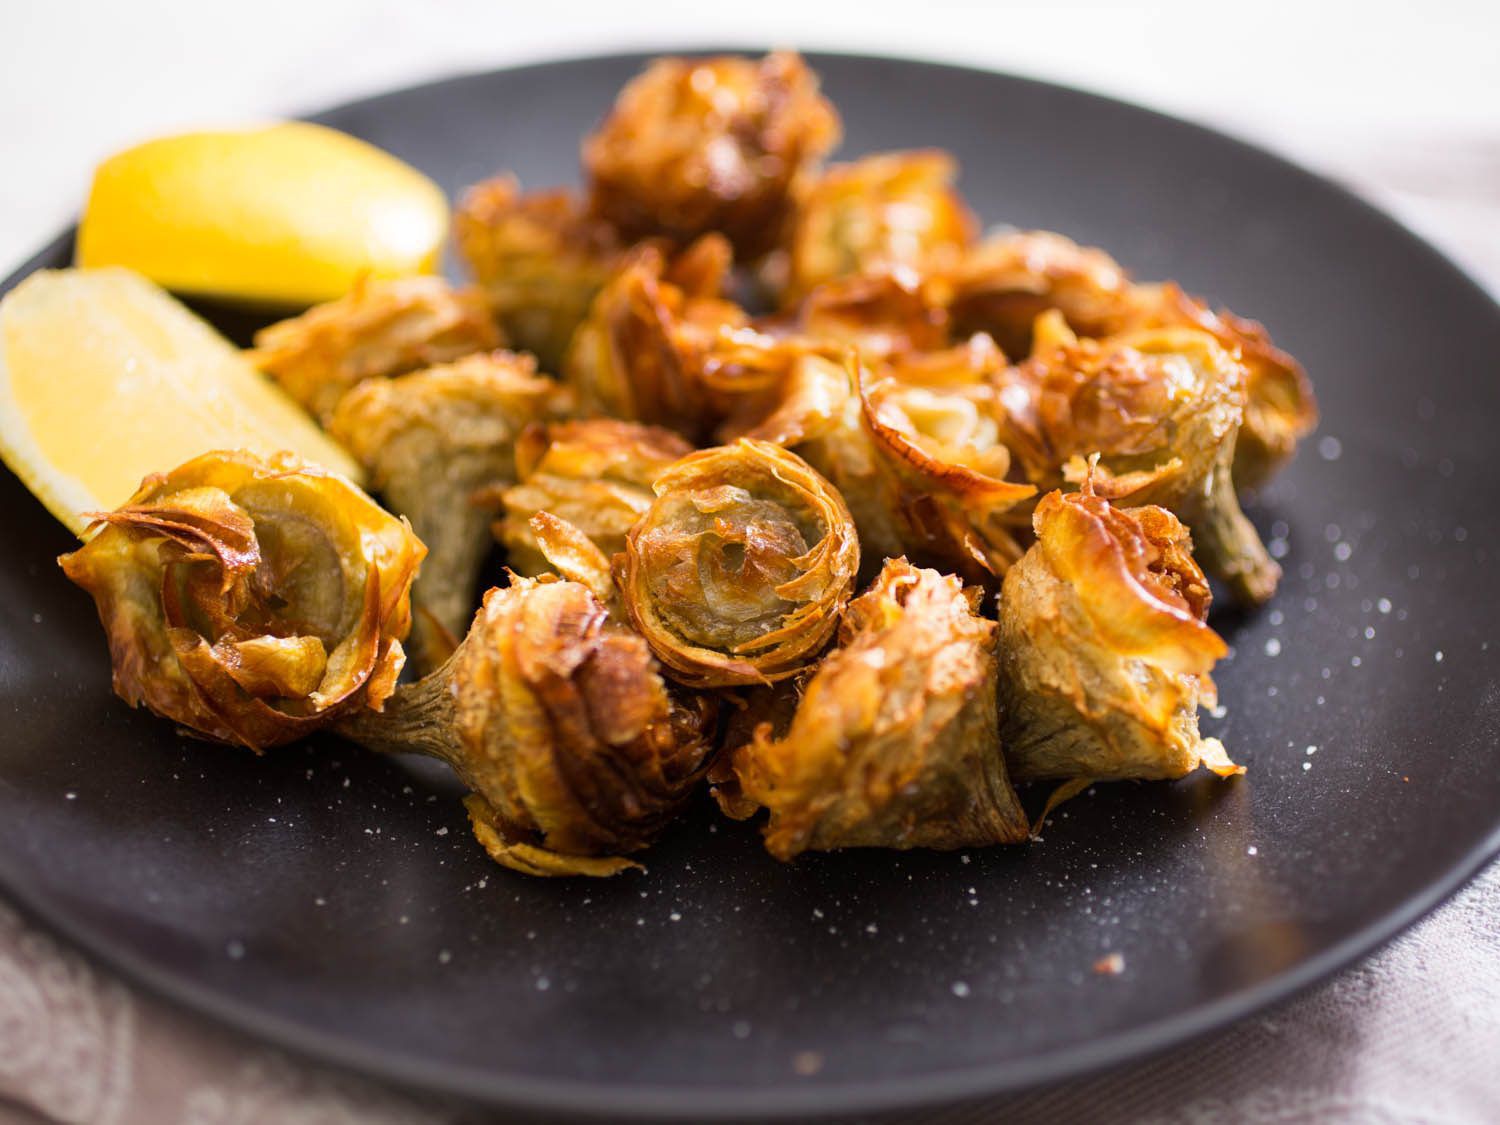 A plate of Roman-Jewish fried artichokes, showered with salt and served with lemon wedges.